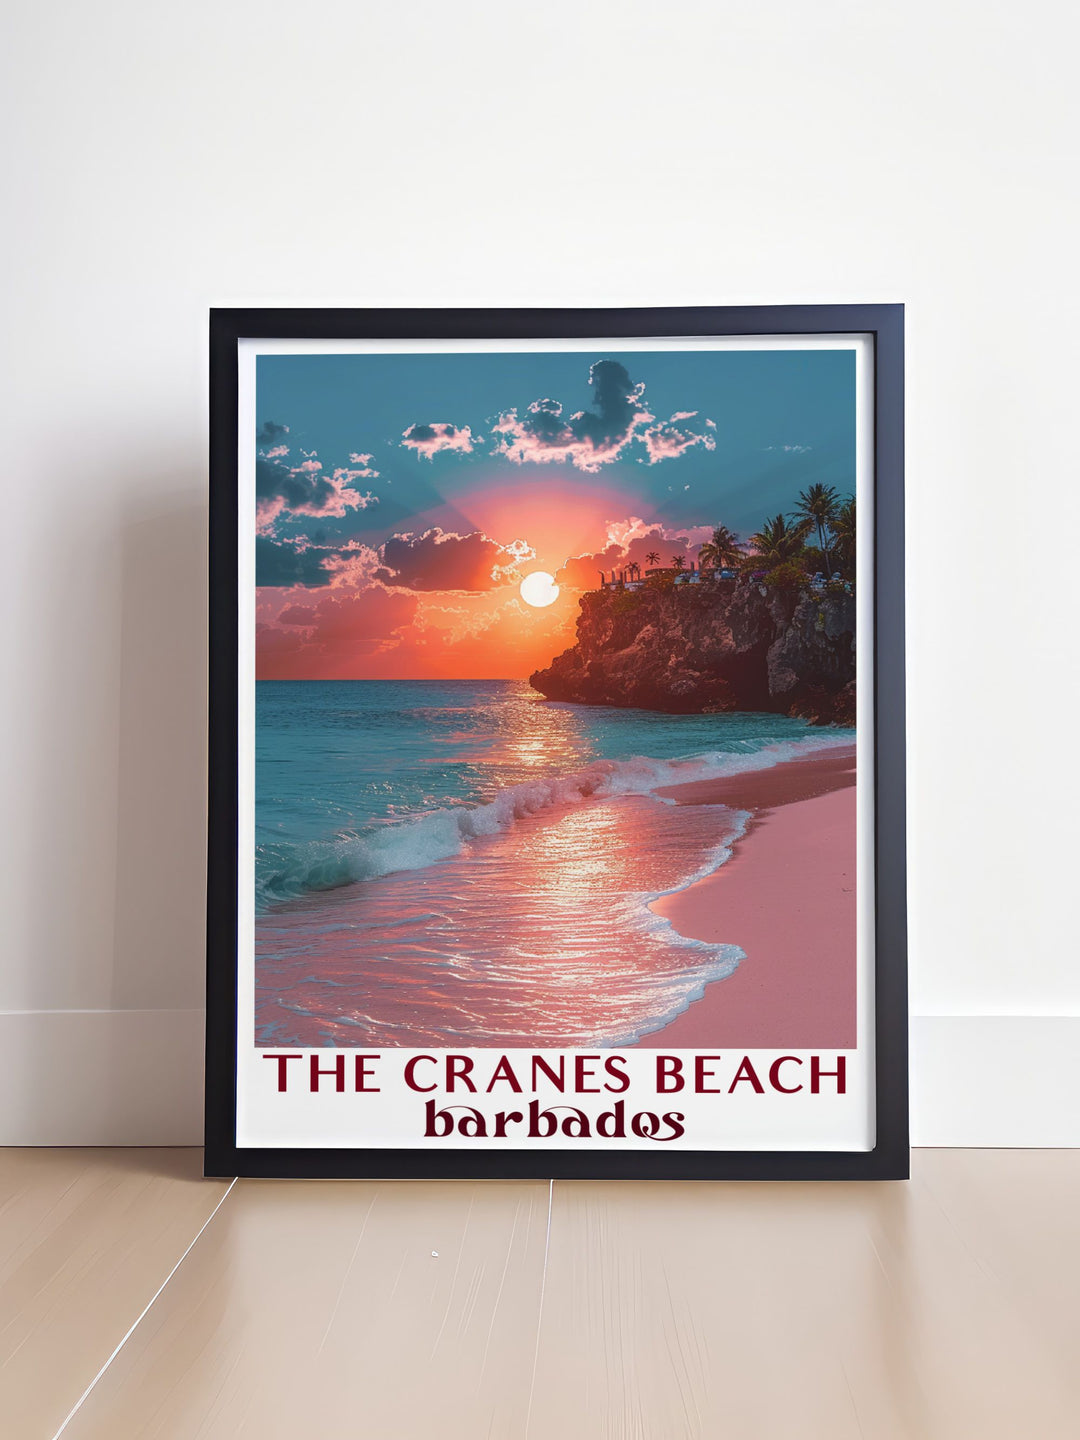 Barbados wall art showcasing the vibrant culture and stunning landscapes of the island, ideal for creating a warm and inviting tropical atmosphere in any living space.